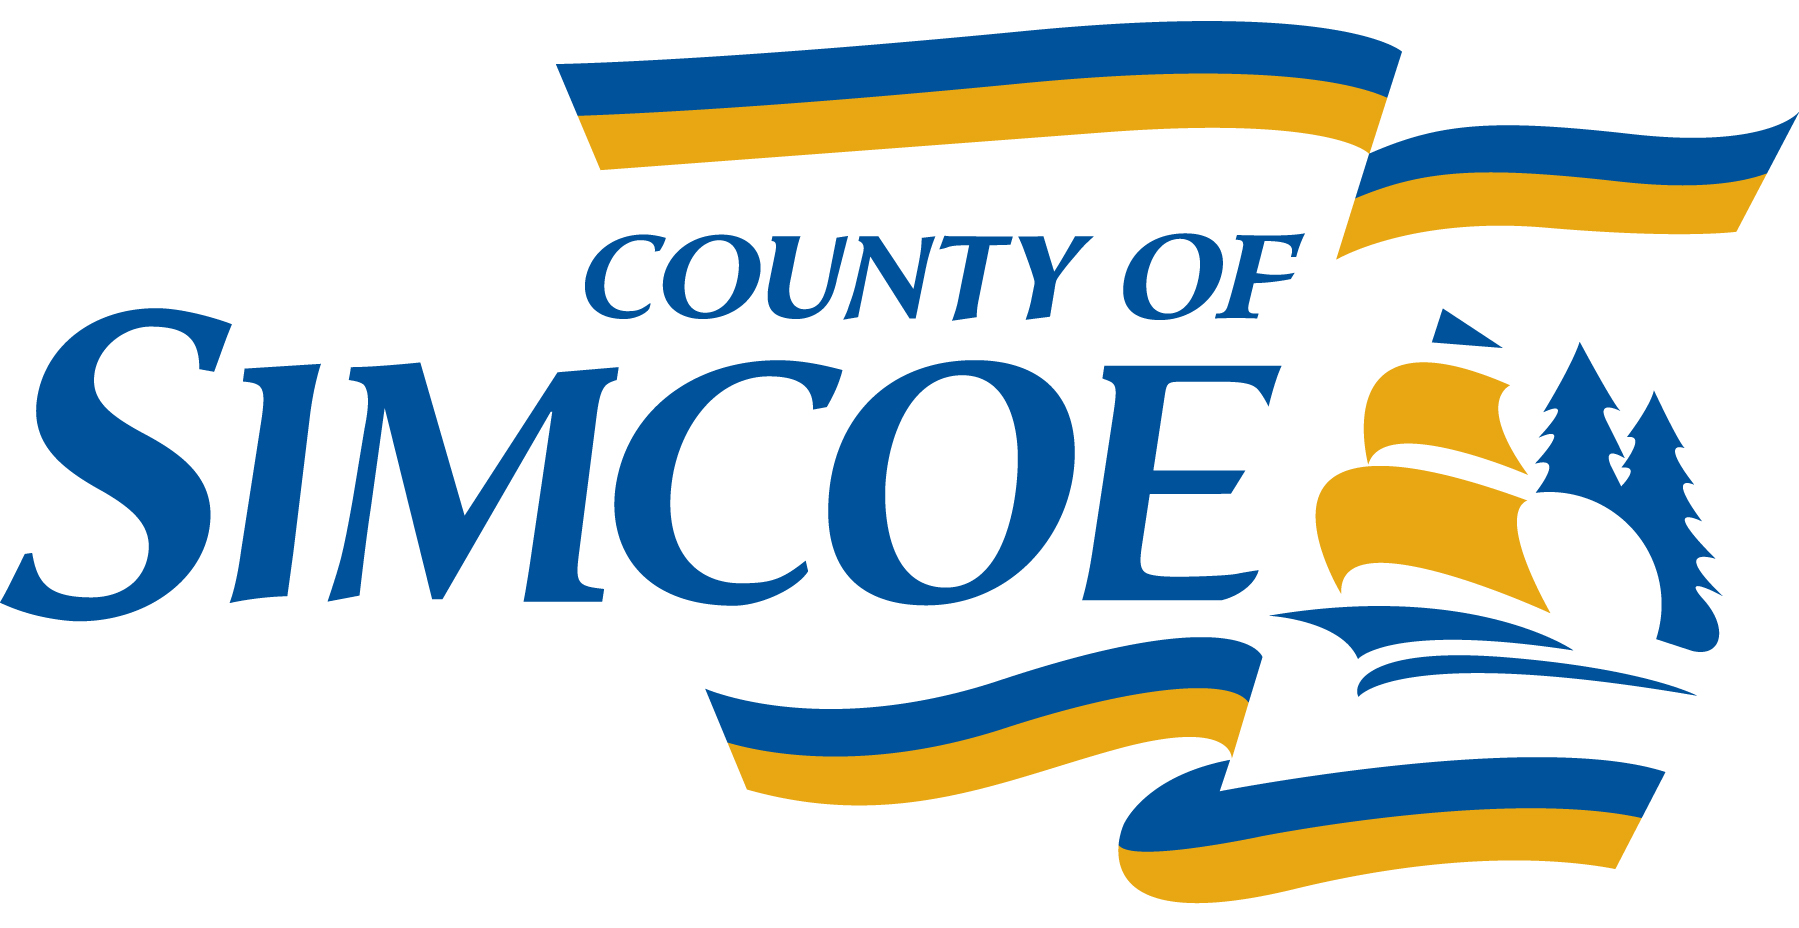 The county of Simcoe